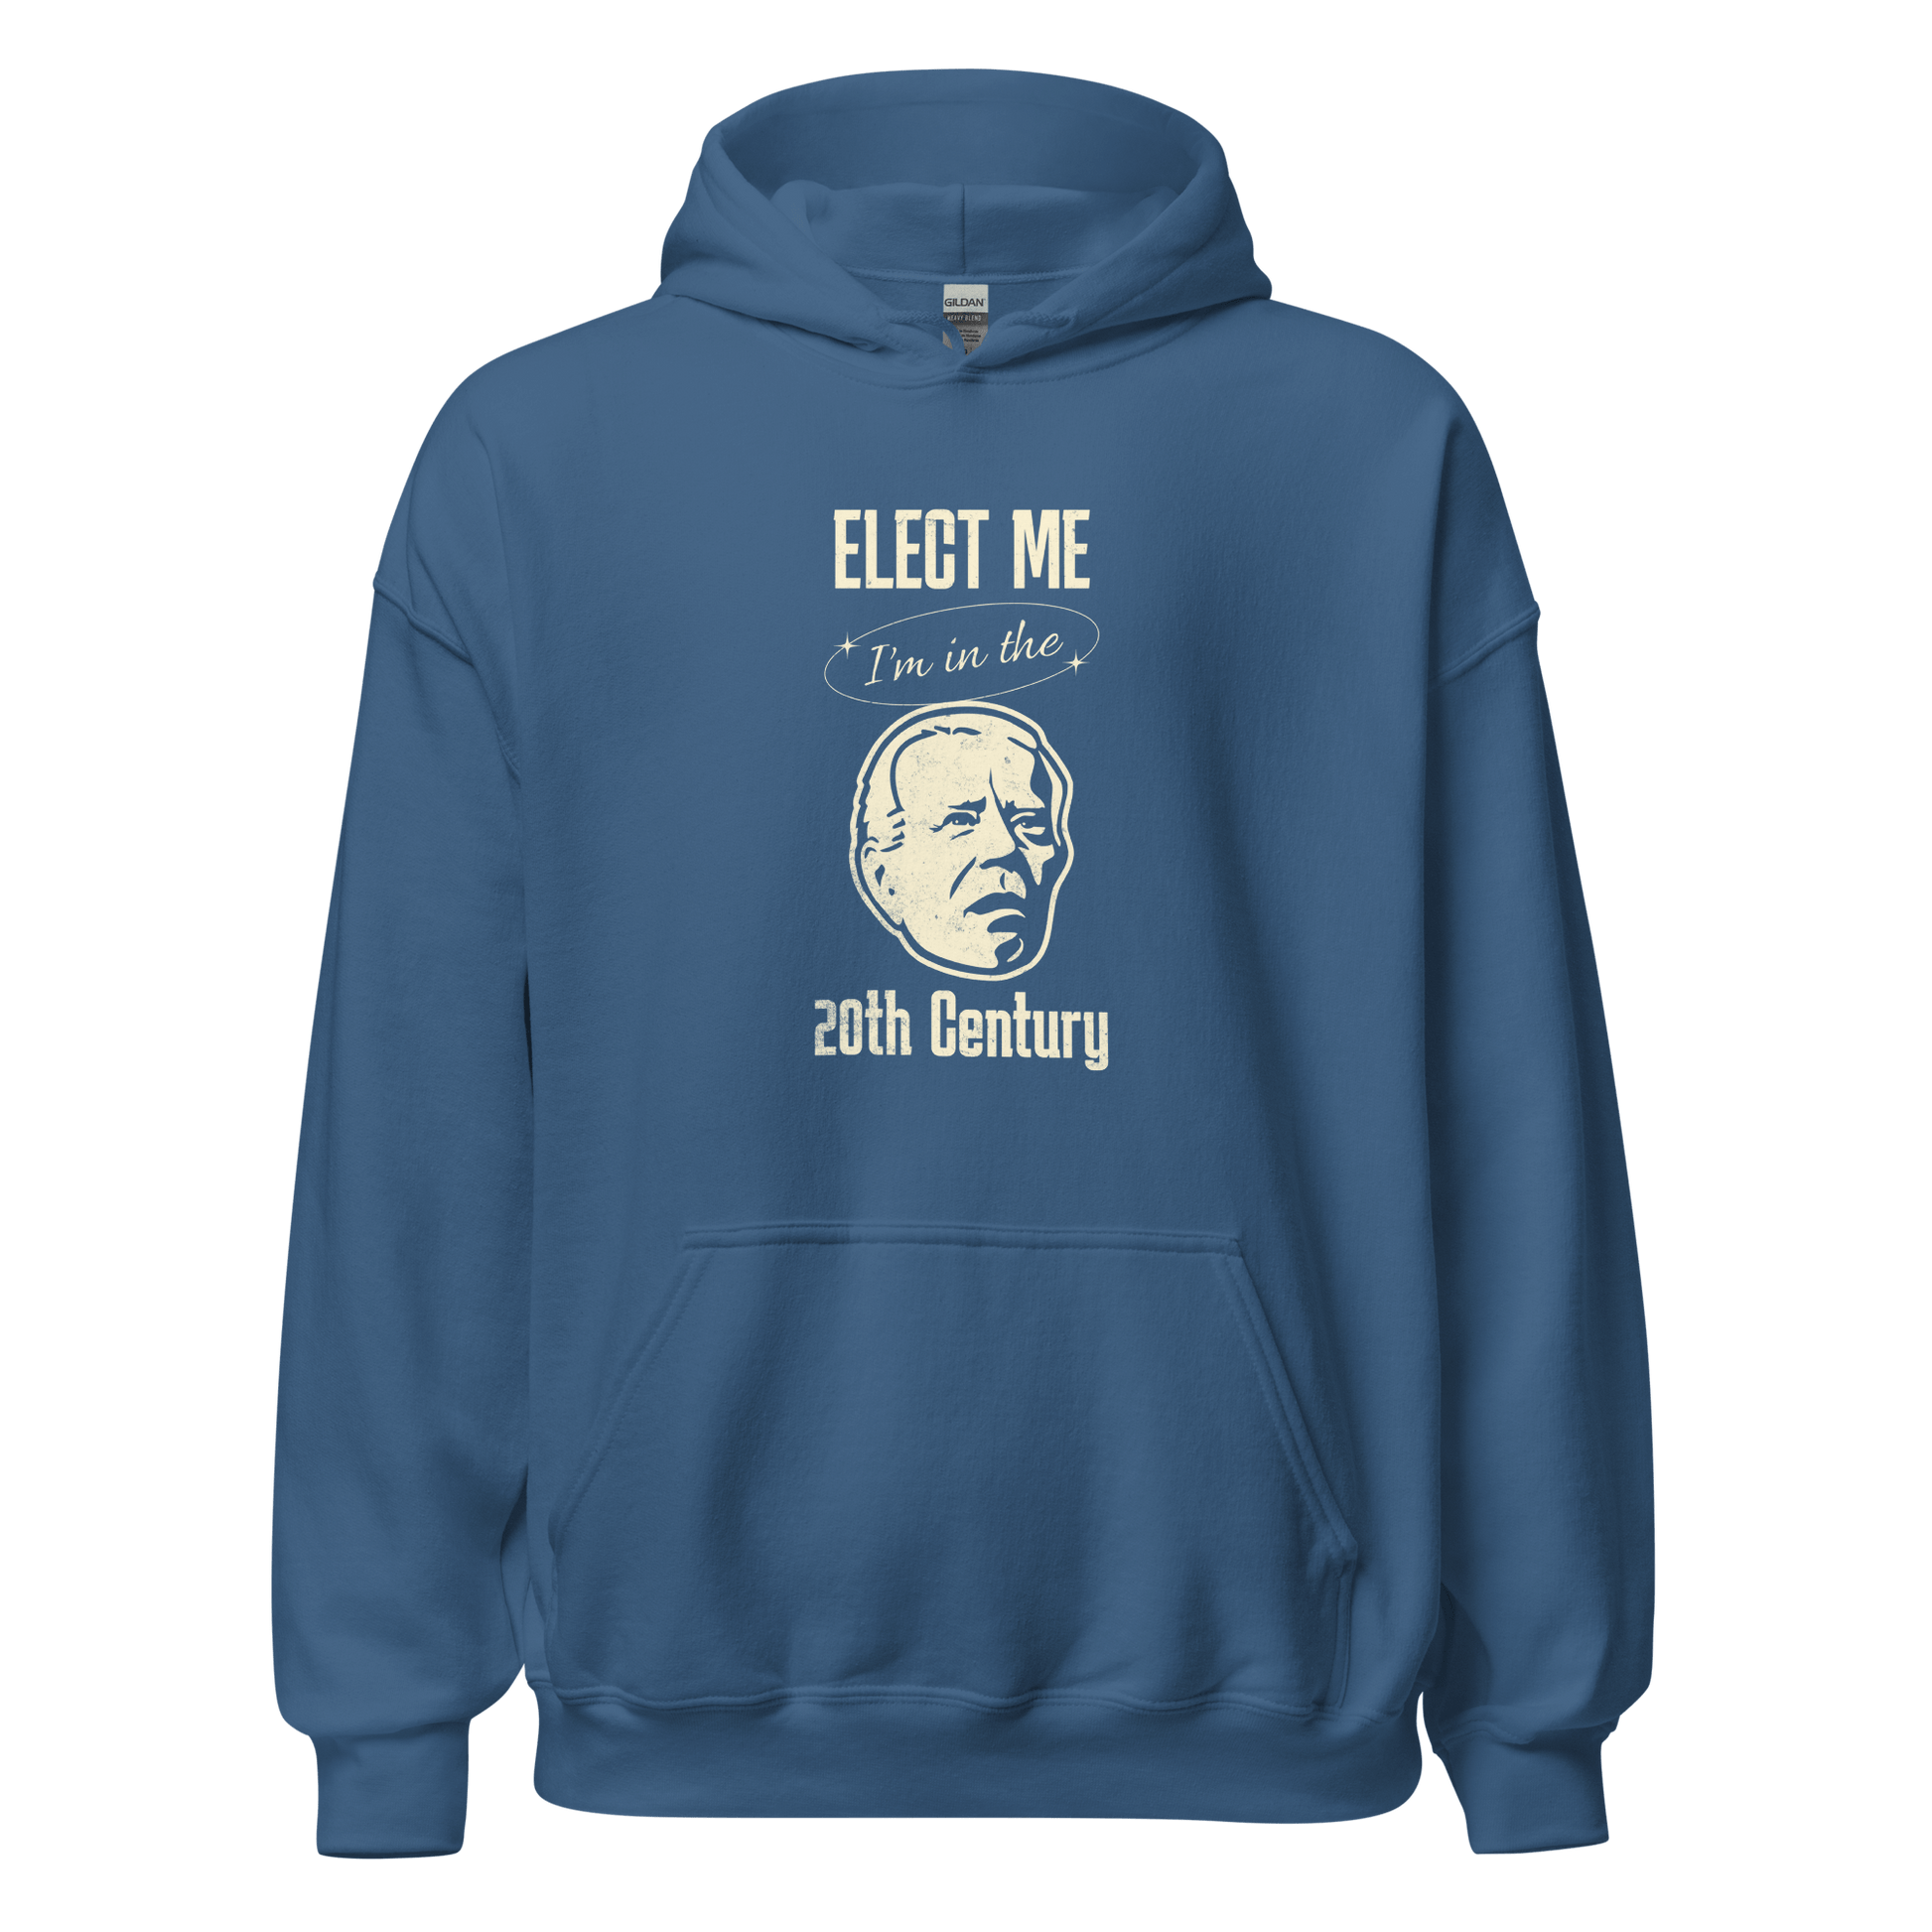 Elect Me I'm in the 20th Century Hoodie | Soft & Stylish FUNNY PRESIDENT,HOODIE,MENS,New,UNISEX,WOMENS Dayzzed Apparel